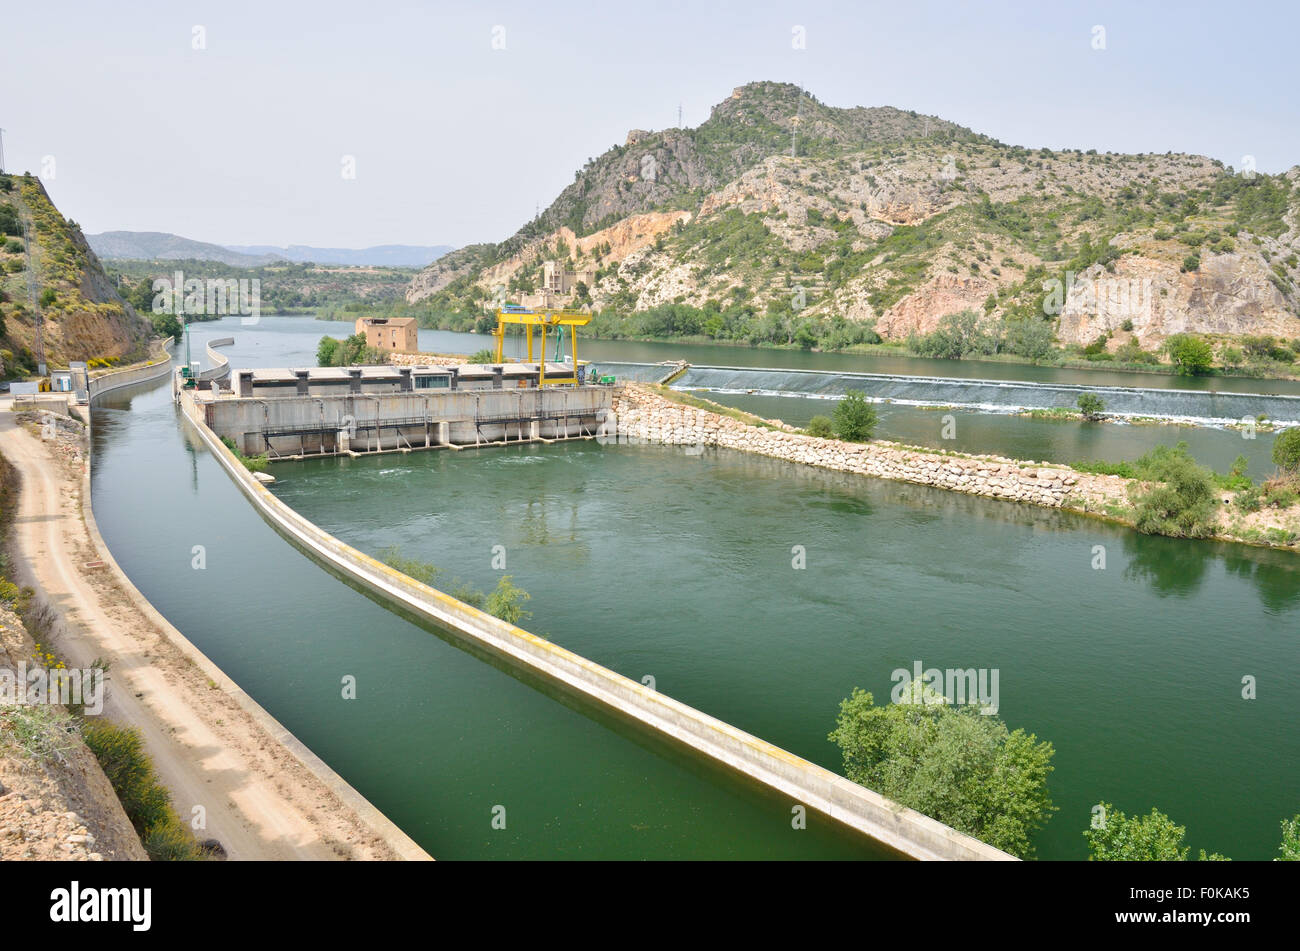 Spanish river Ebro with hydrological constructions Stock Photo